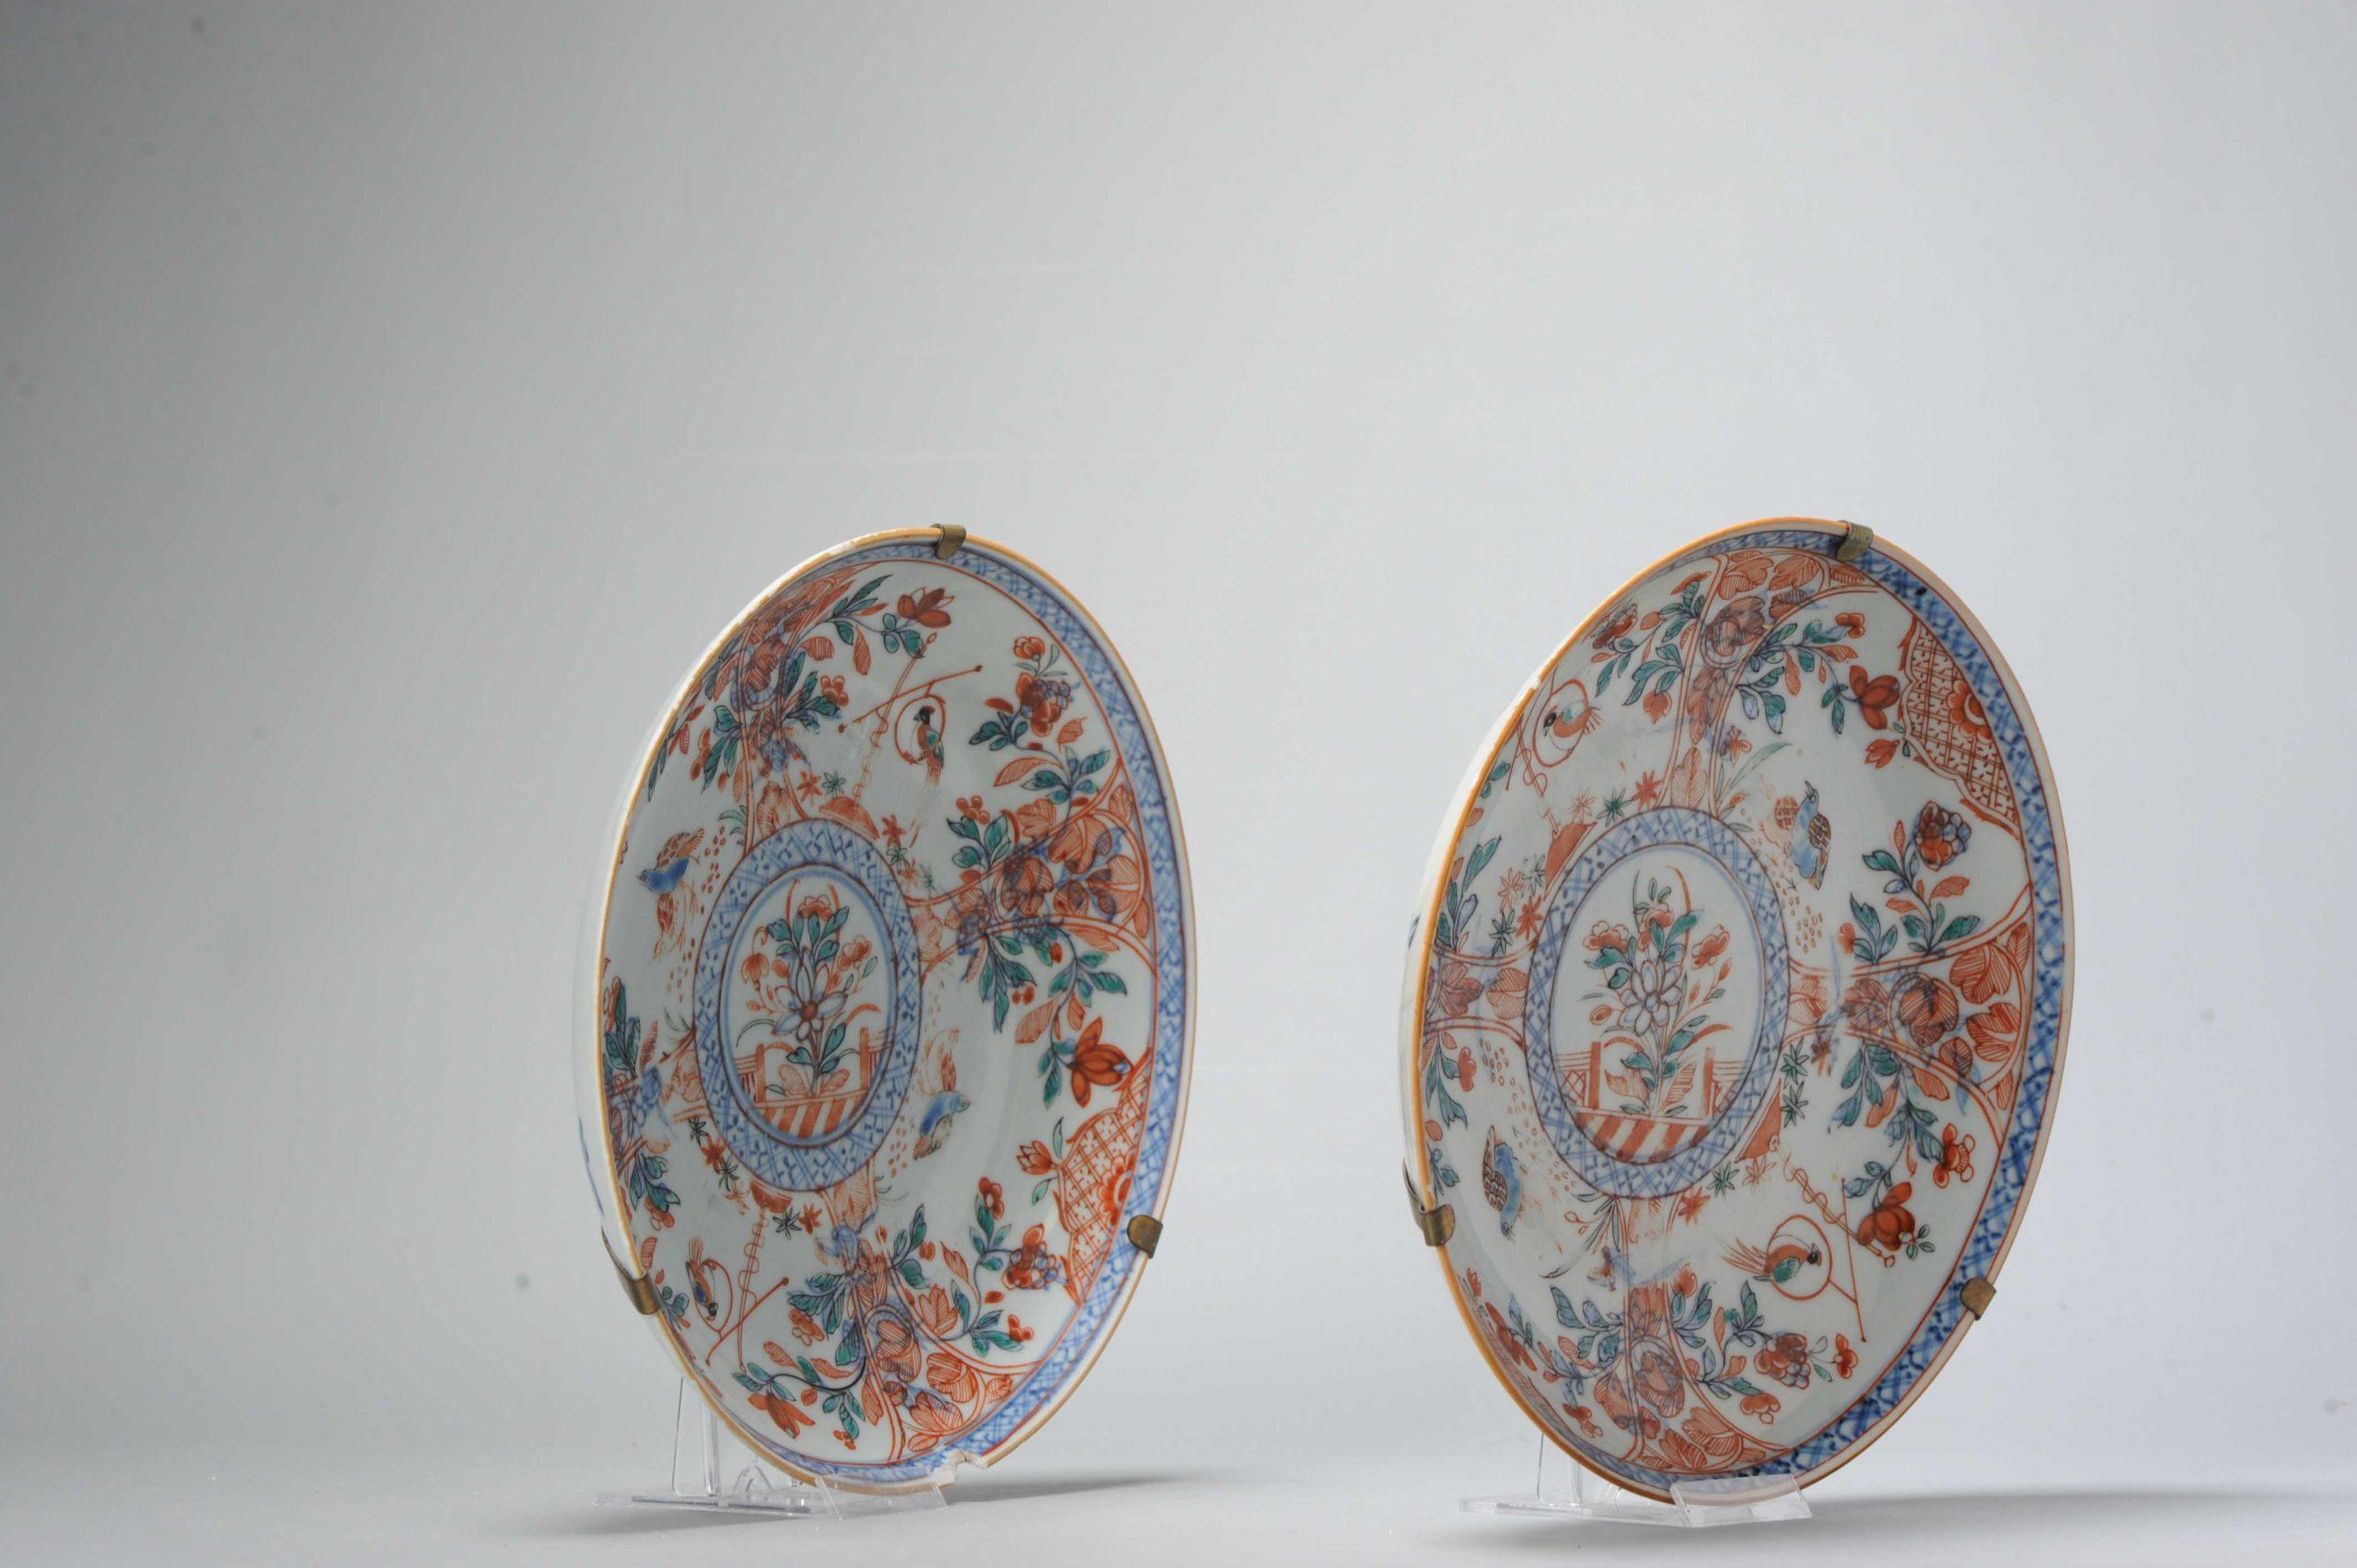 A very nicely made pair of two 18th century Amsterdam Bont porcelain dishes. Most probably Qianlong period blue and white dishes with Amsterdam bont over-decoration of flowers, quails and parrrots. Truly museum pieces.

We take a look at Amsterdams